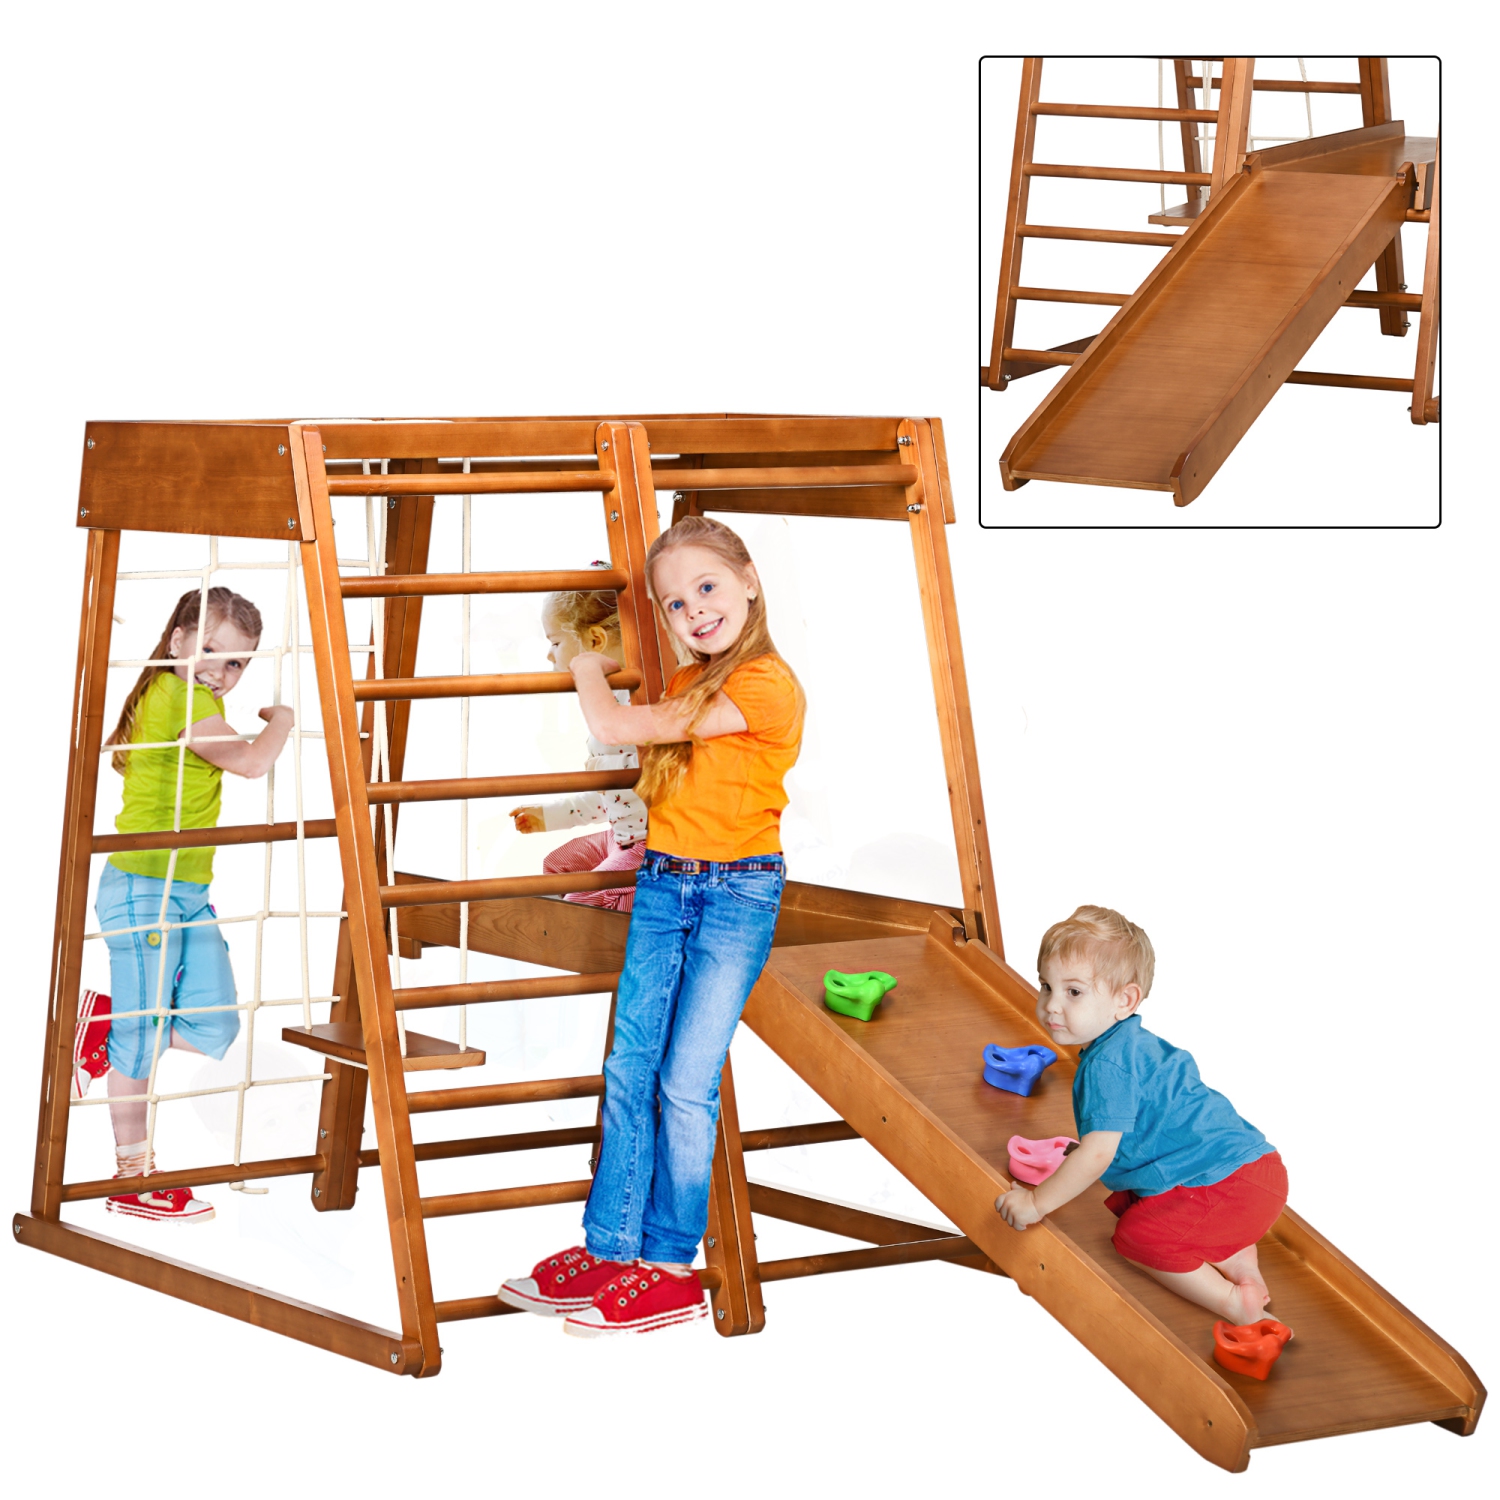 Qaba 6-in-1 Kids Indoor Playground Jungle Gym with Slide, Climbing Wall, Rope Climber, Monkey Bars, Swing, Ladder, Toddler Climbing Toys for 3-10 Years Old